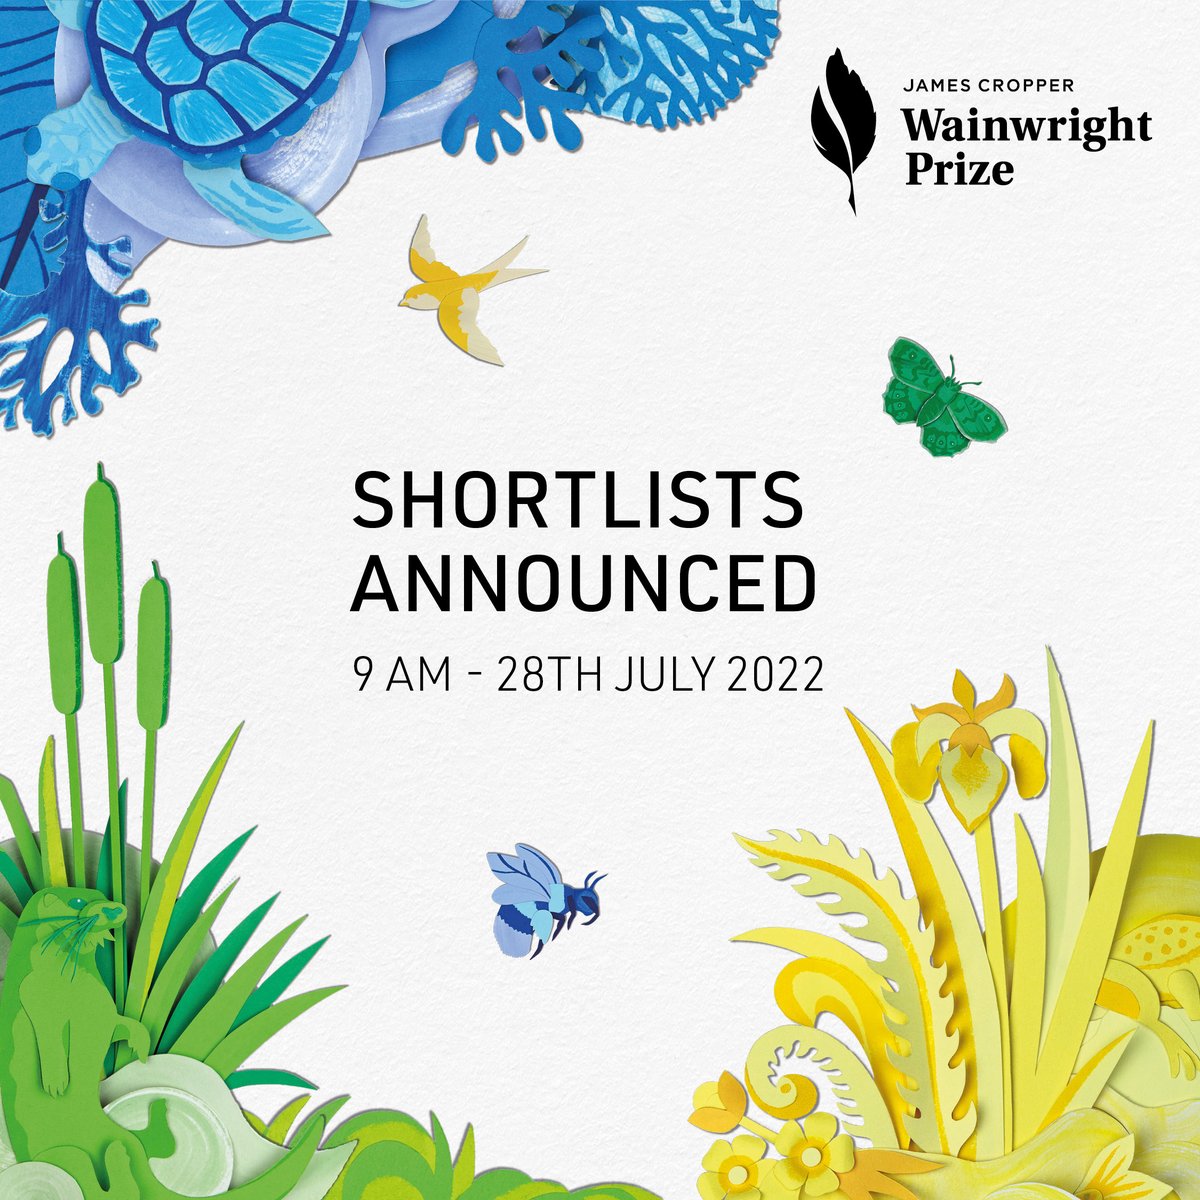 We are absolutely DELIGHTED to be announcing the 2022 #JCWP22 #WainwrightPrize22 shortlists for writing on #nature & #conservation for adults and children in 2 DAYS!!! @jamescropper 🤩👇 Stay tuned, the countdown is well and truly on!